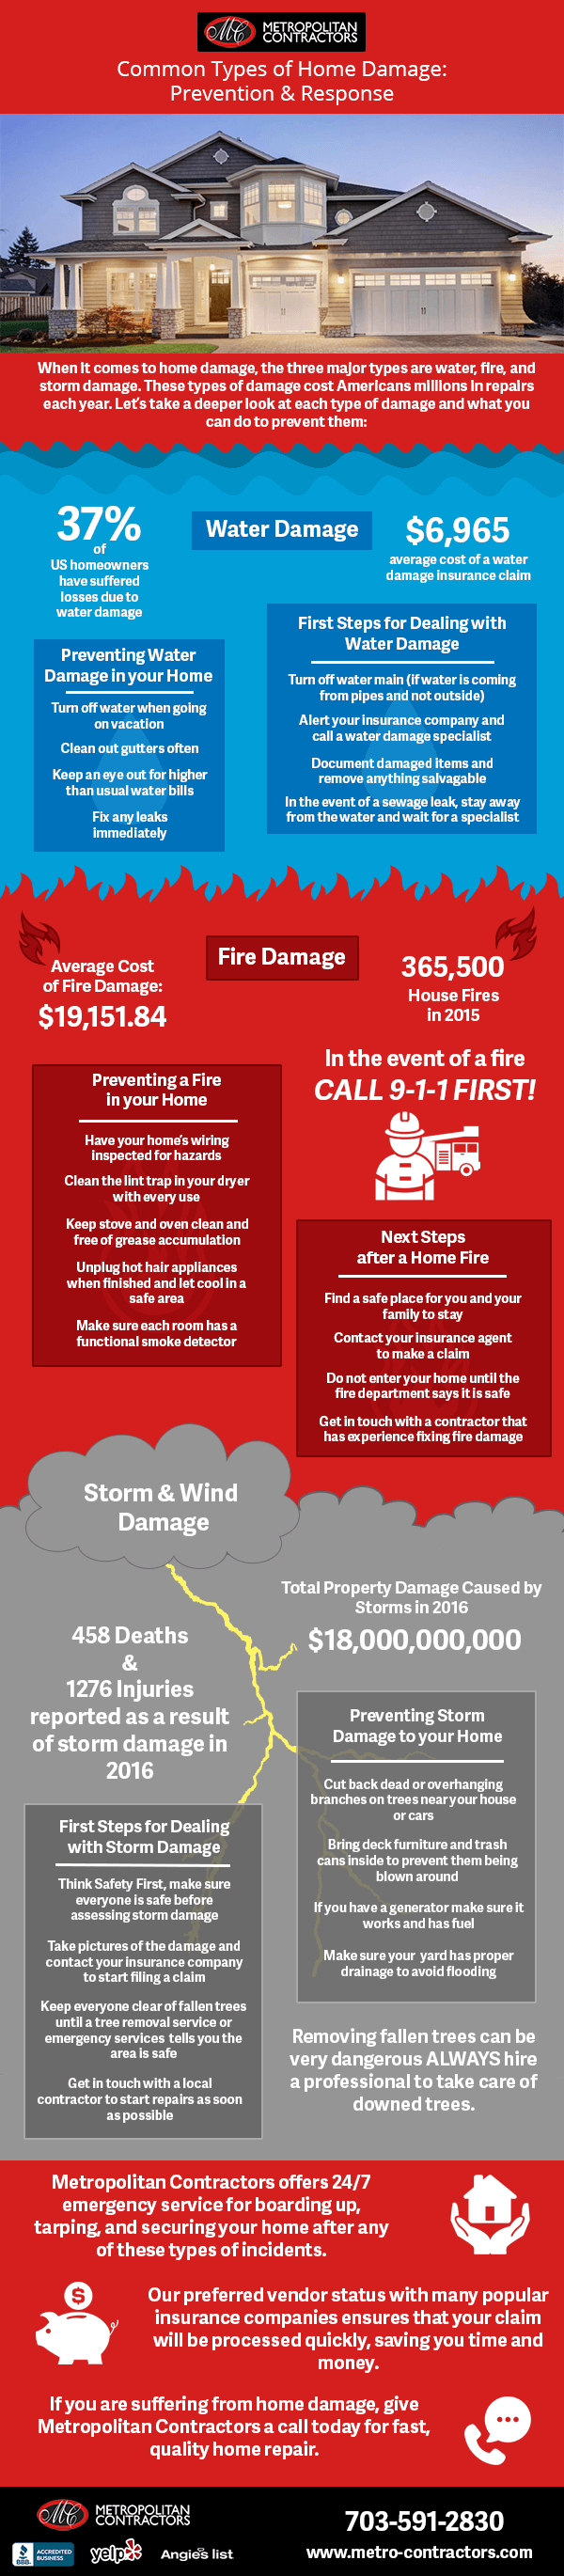 Common Types of Home Damage